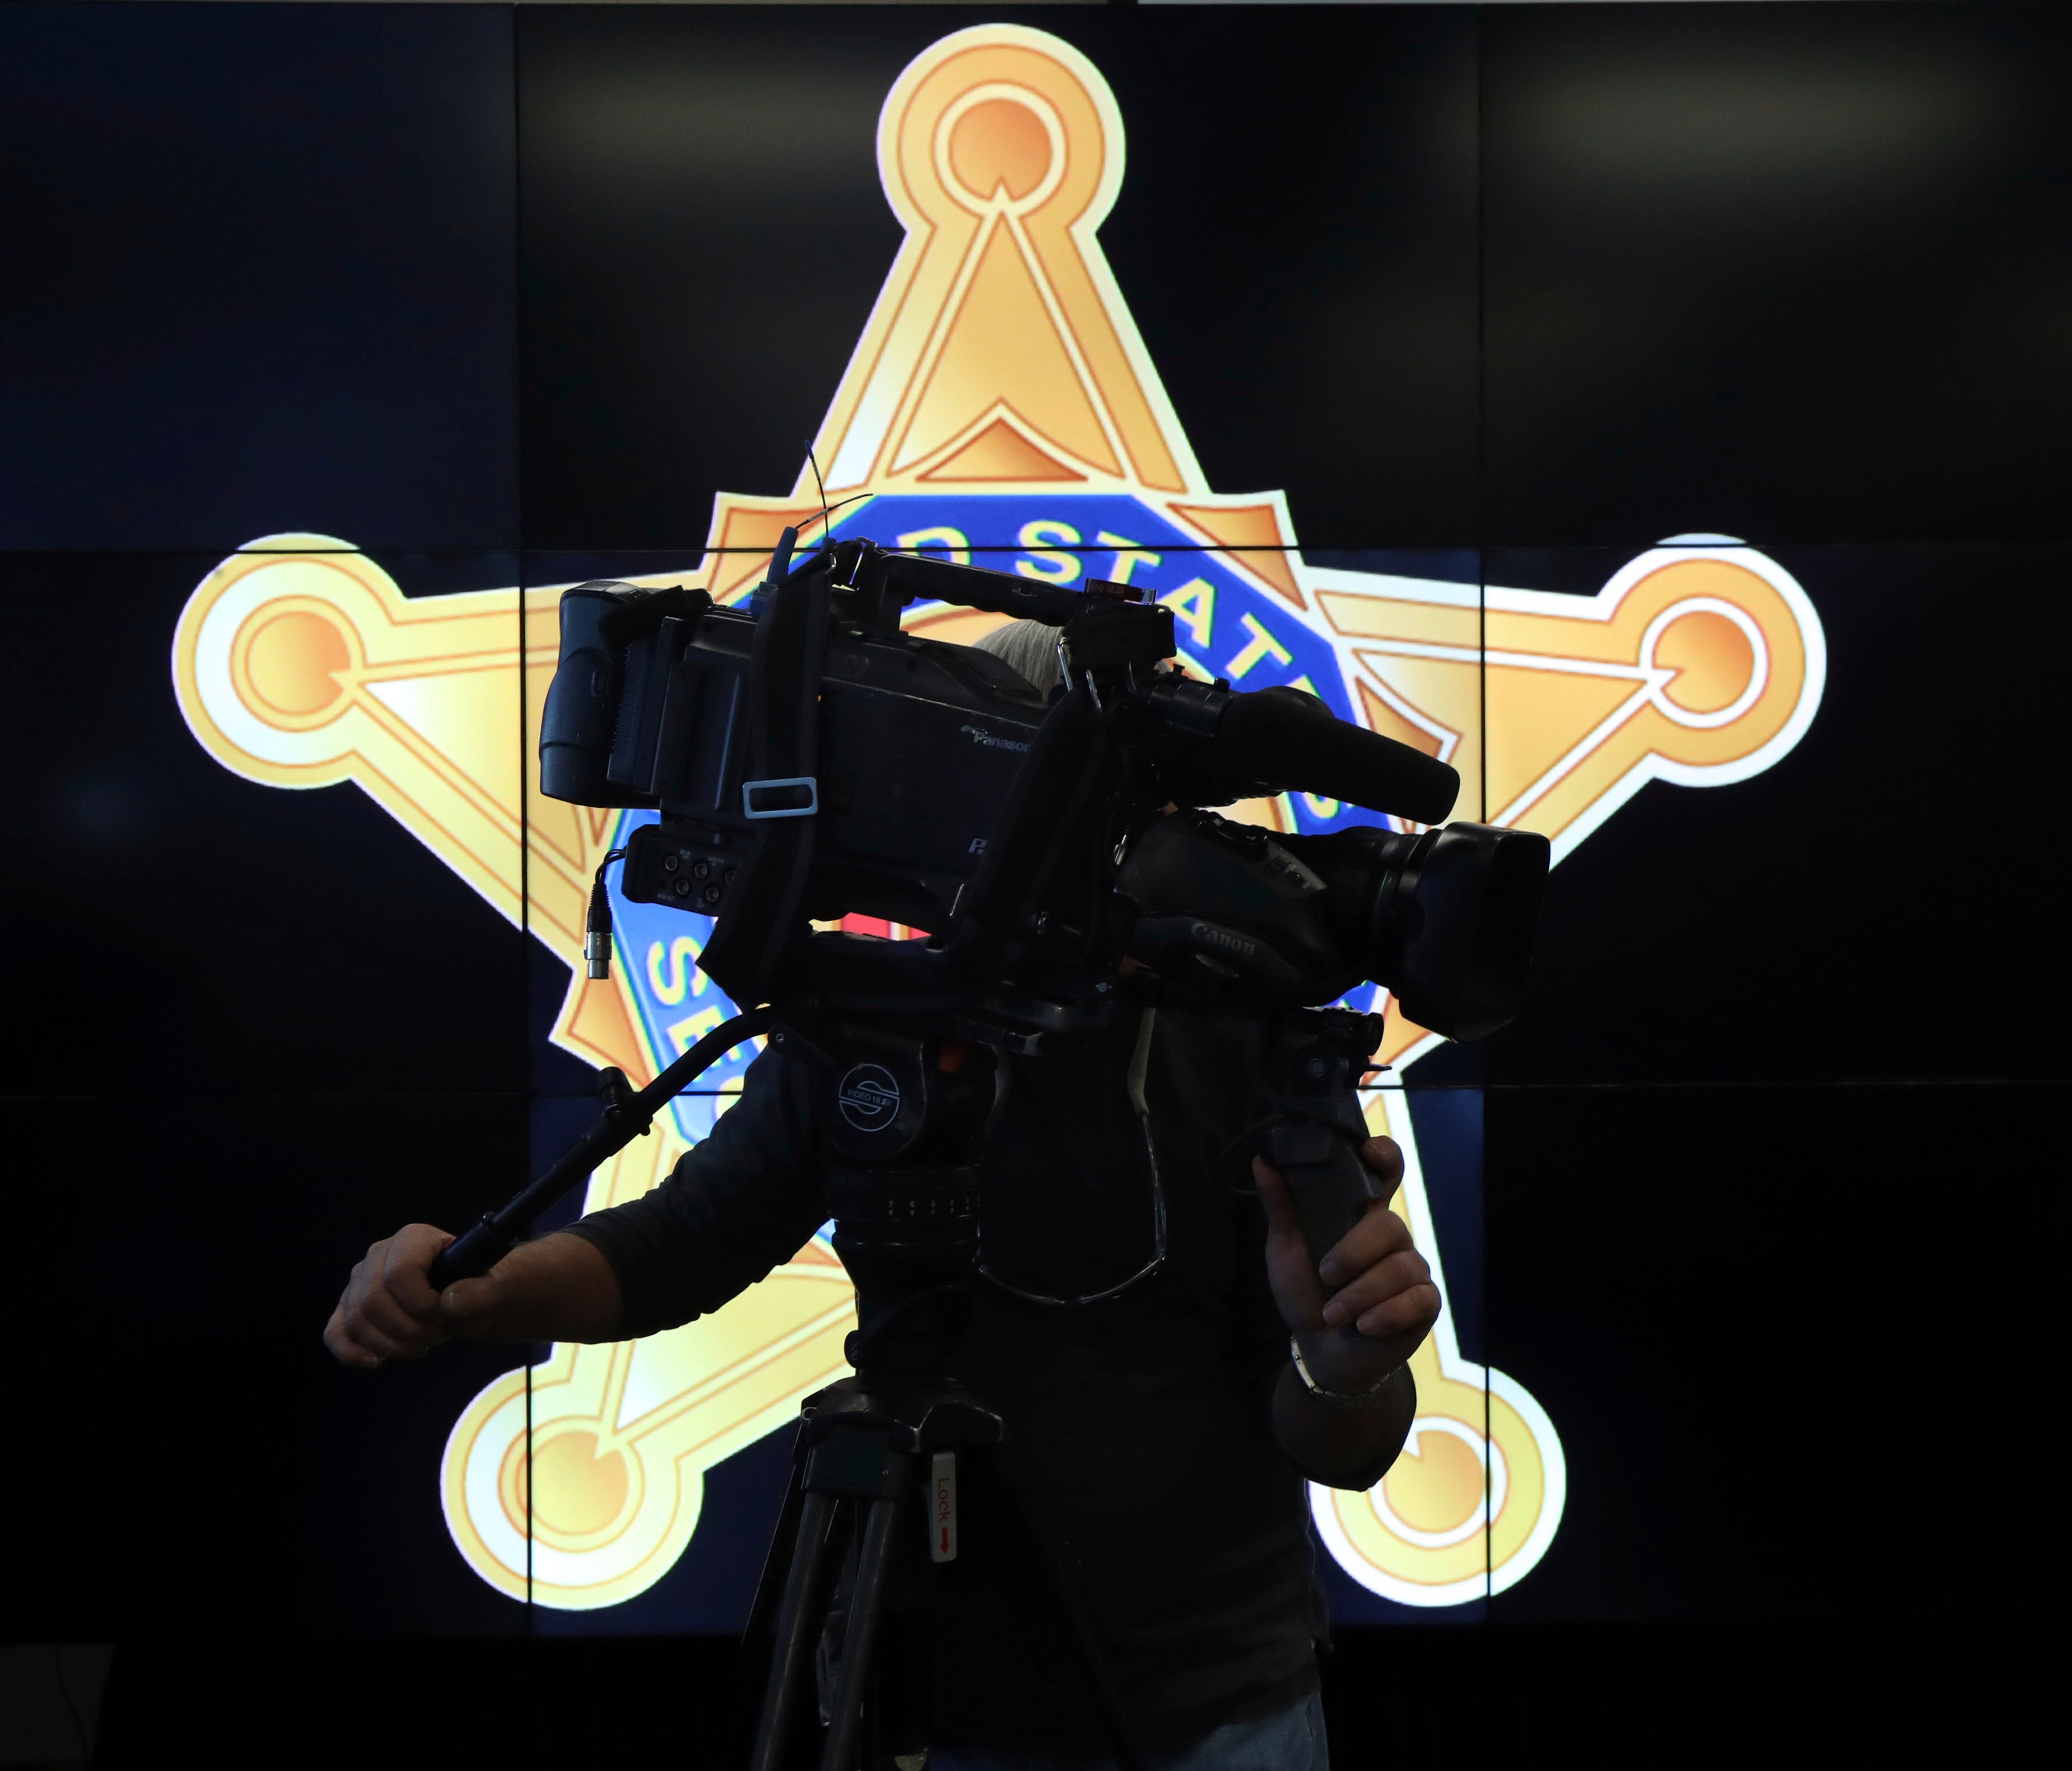 A television cameraman records a news conference in front of the U.S. Secret Service logo, attended by Homeland Security Secretary Jeh Johnson, about the security for the presidential inauguration and activities related to it, Friday, Jan. 13, 2017 a